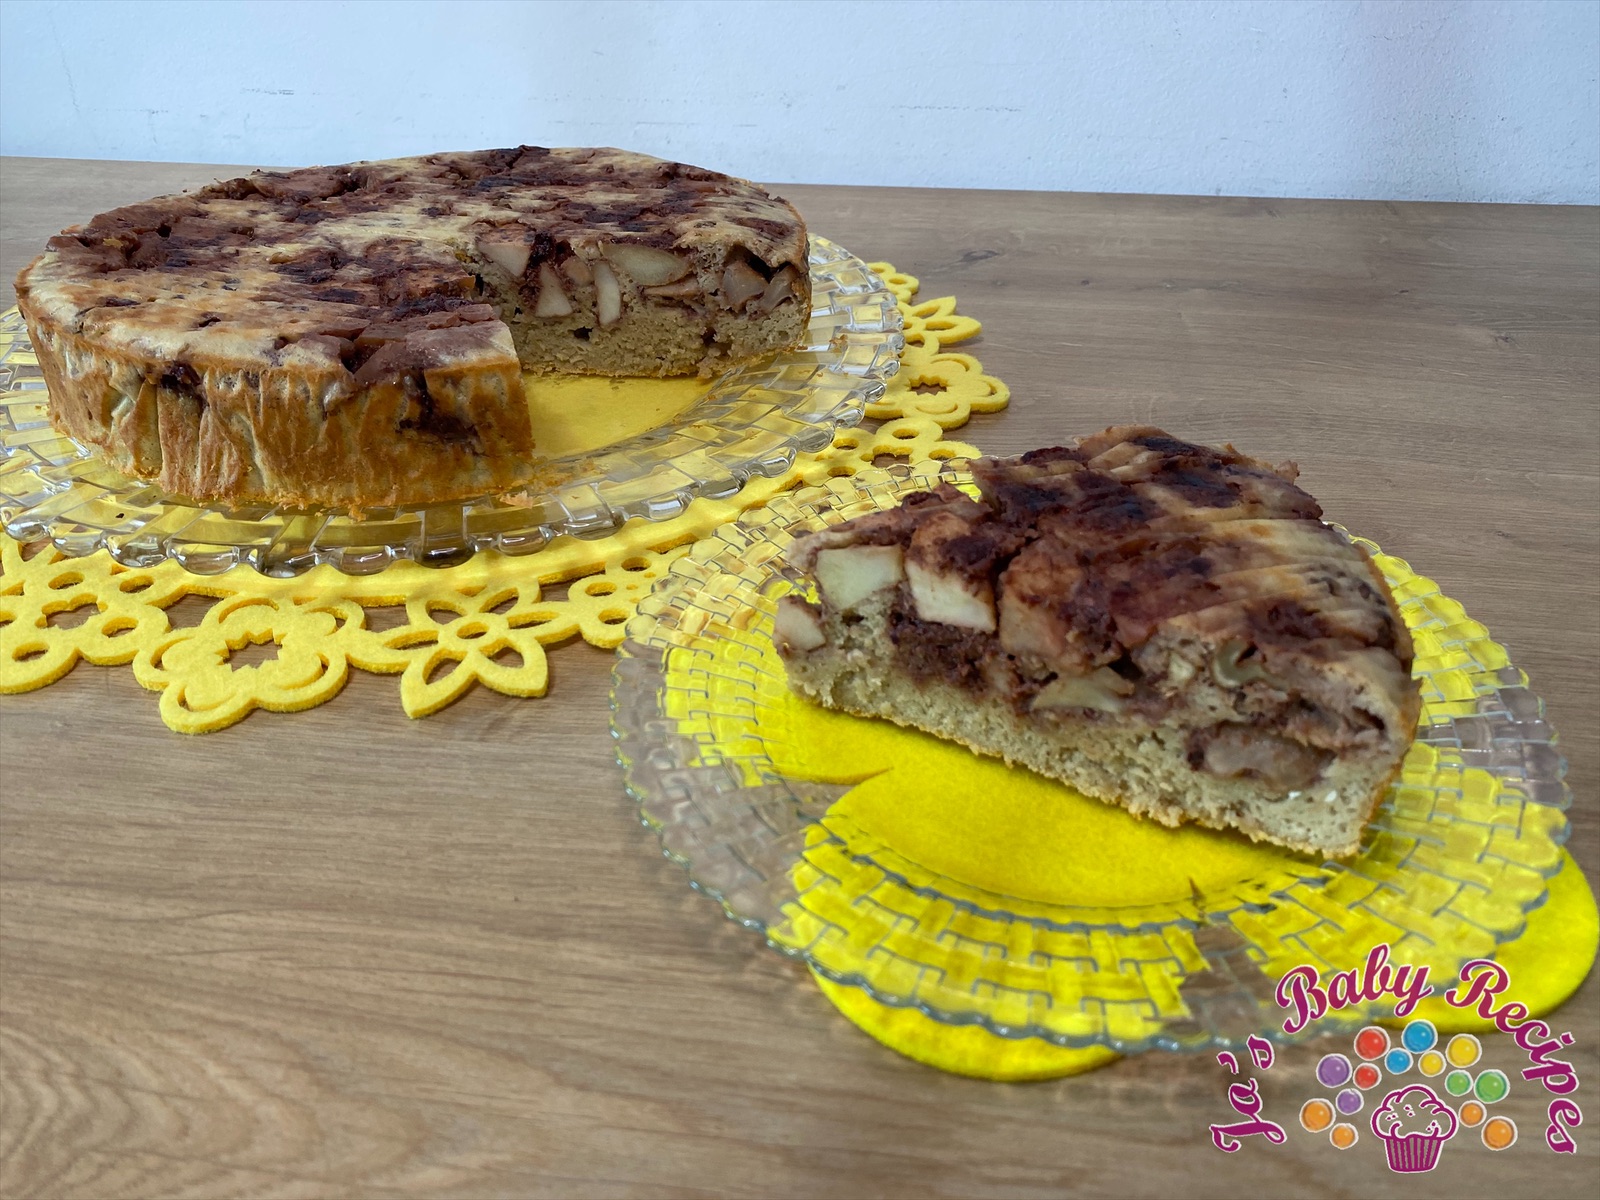 Upside down cake with apples and nuts